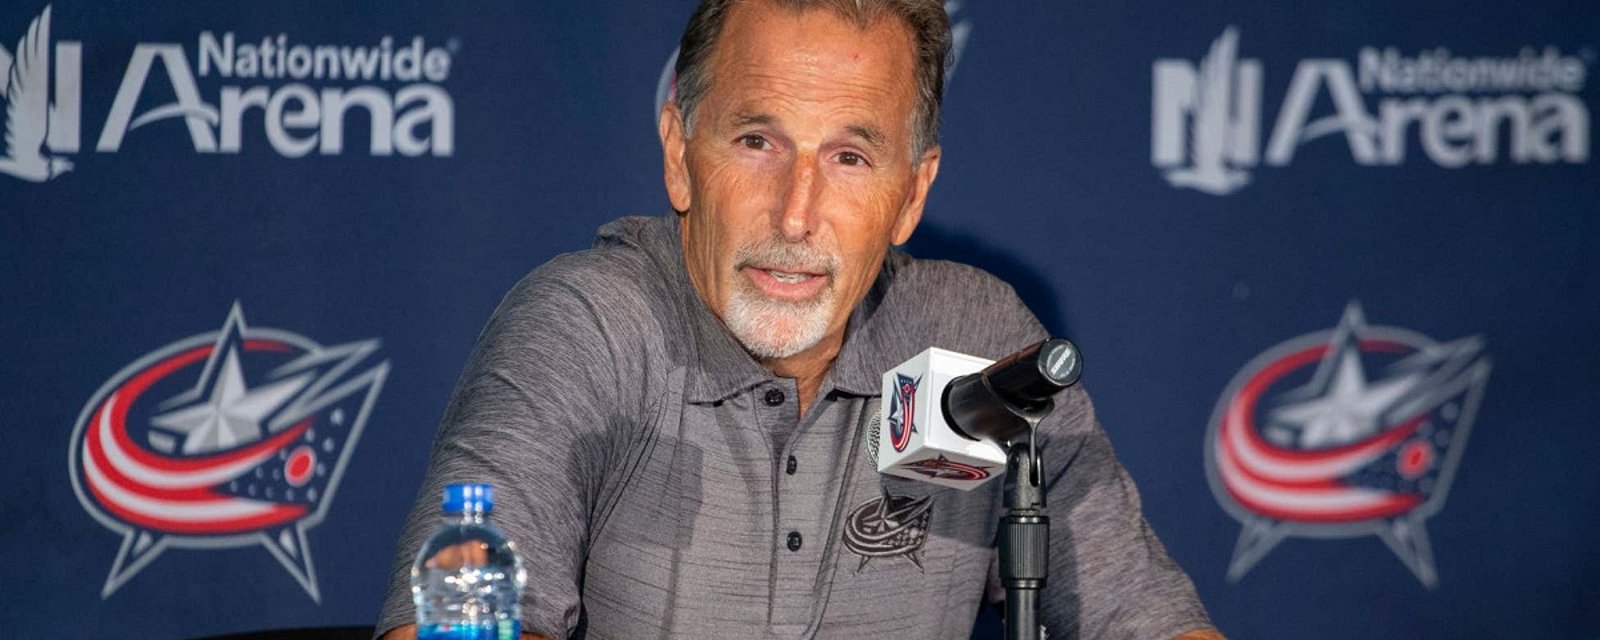 John Tortorella asked point blank if he expects to be fired.